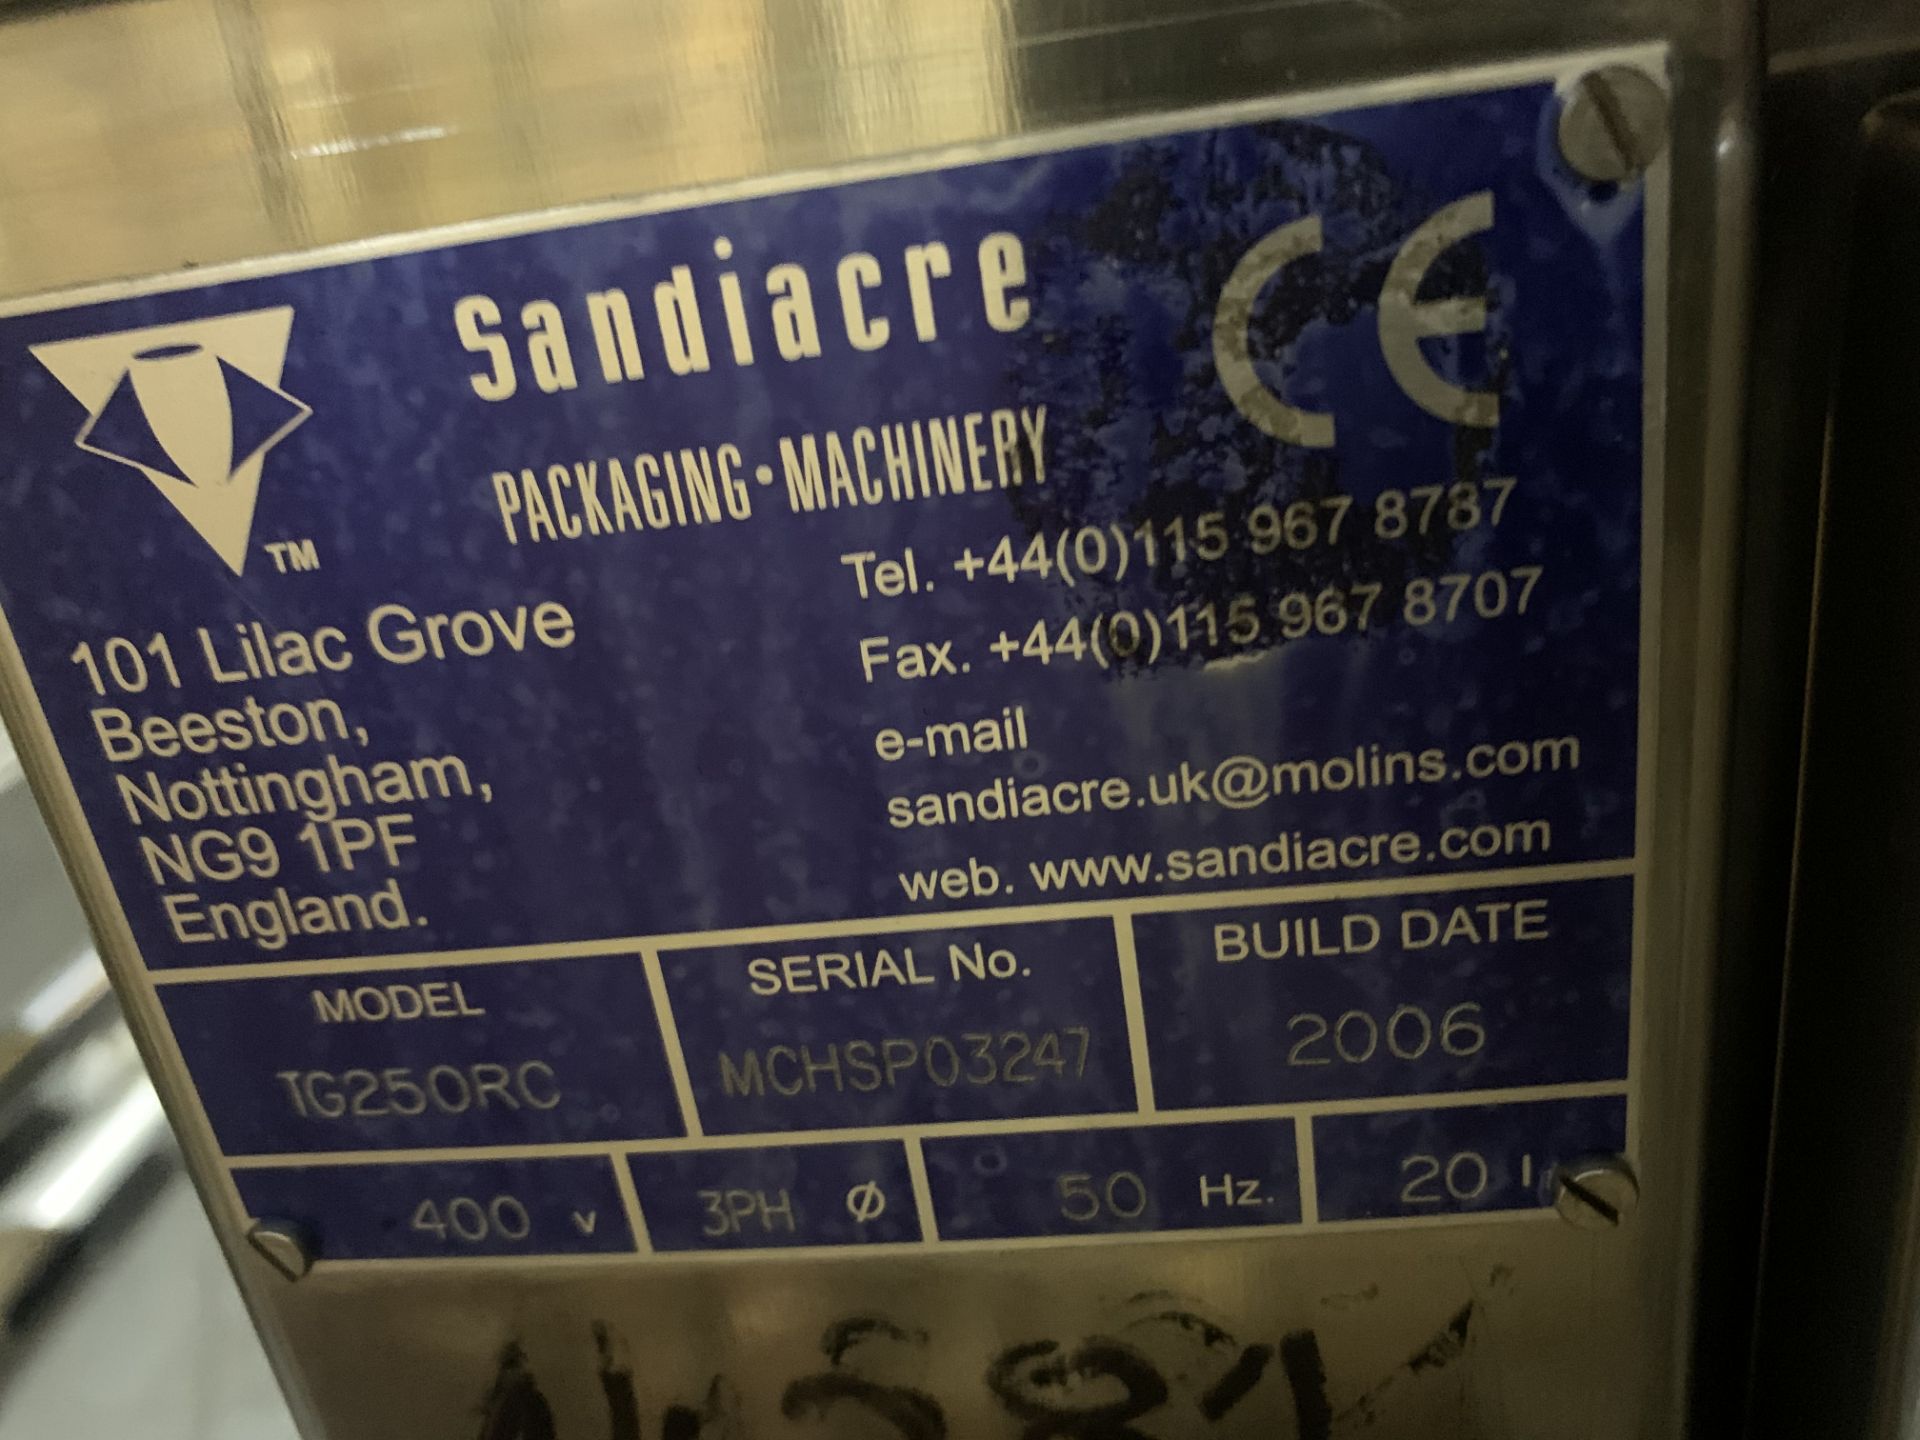 Sandiacre TG250RC Vertical Form Fill Seal Machine (Cracked Screen), approx. 1.9m high x 2.8m long - Image 10 of 10